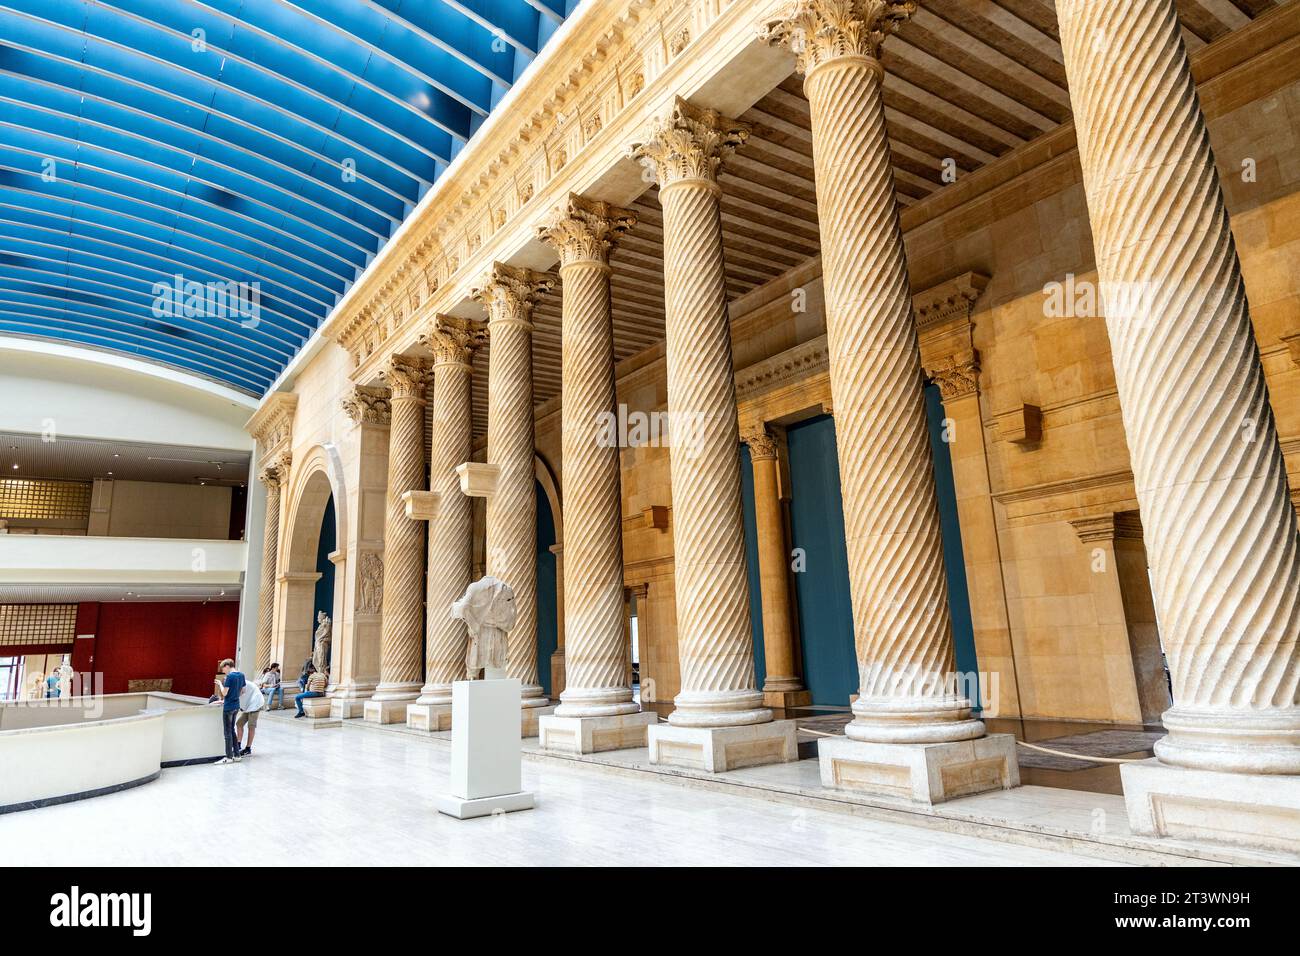 Interior of the Royal Museums of Art and History with a reconstruction of the Great Colonnade from Apamea (Syria), Brussels, Belgium Stock Photo